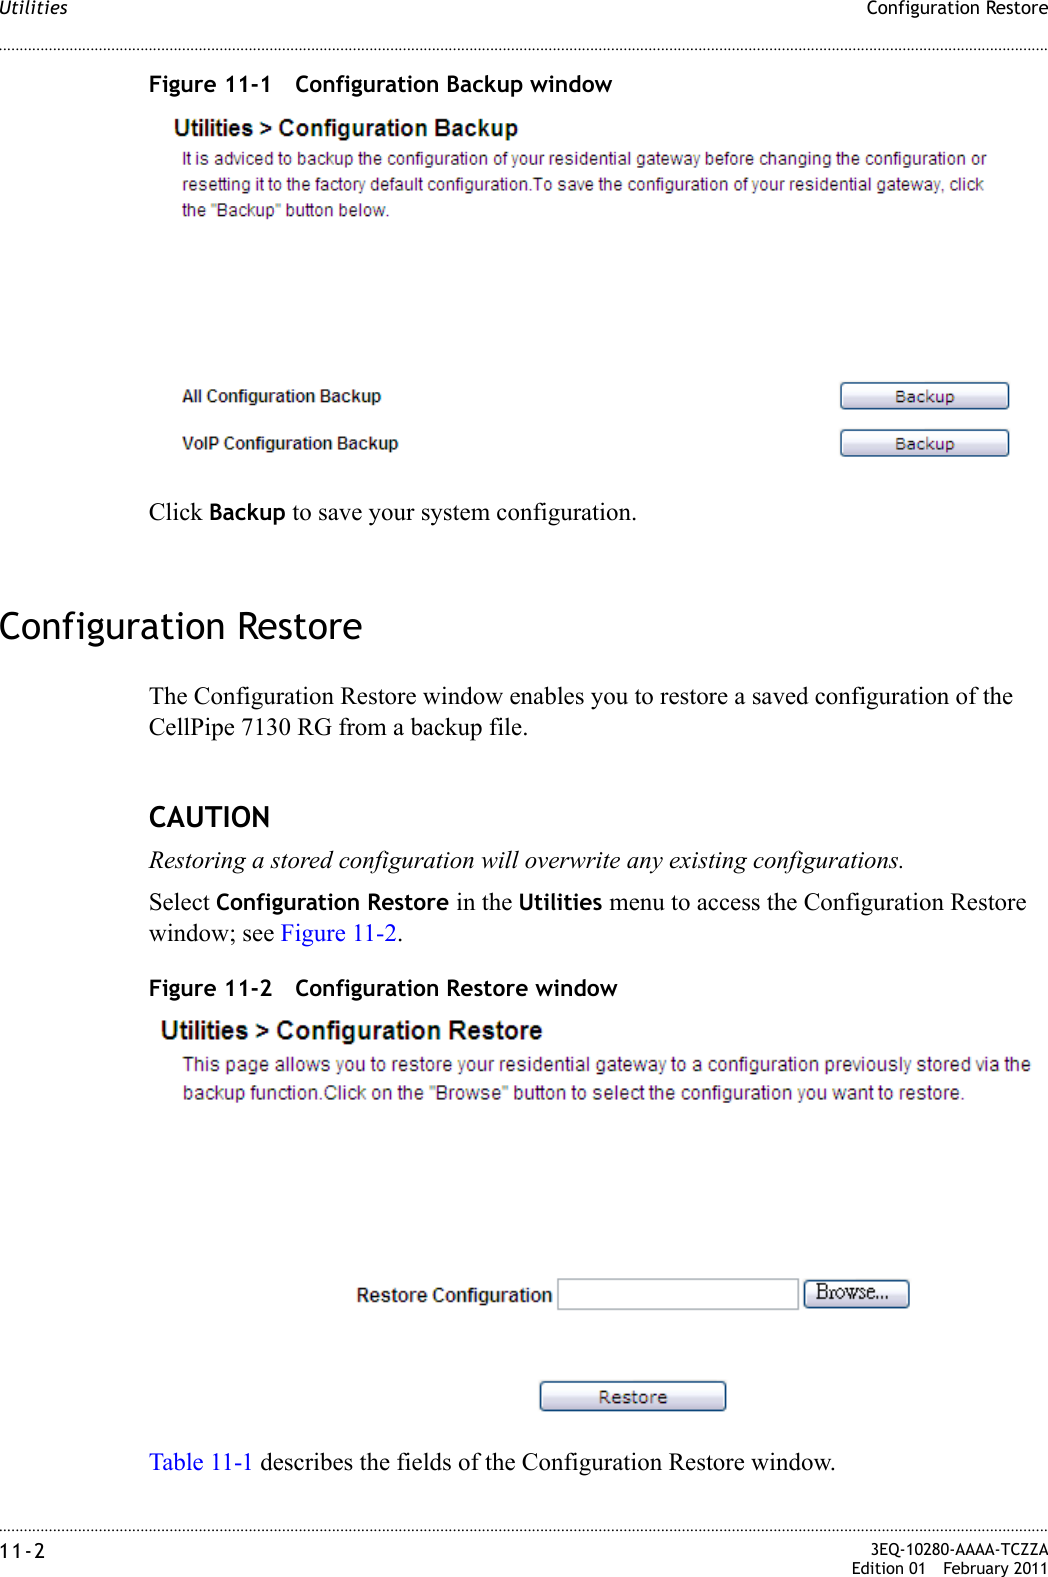 ............................................................................................................................................................................................................................................................Configuration RestoreUtilities11-2  3EQ-10280-AAAA-TCZZAEdition 01 February 2011............................................................................................................................................................................................................................................................Figure 11-1 Configuration Backup windowClick Backup to save your system configuration.Configuration RestoreThe Configuration Restore window enables you to restore a saved configuration of the CellPipe 7130 RG from a backup file.CAUTIONRestoring a stored configuration will overwrite any existing configurations.Select Configuration Restore in the Utilities menu to access the Configuration Restore window; see Figure 11-2.Figure 11-2 Configuration Restore windowTable 11-1 describes the fields of the Configuration Restore window.